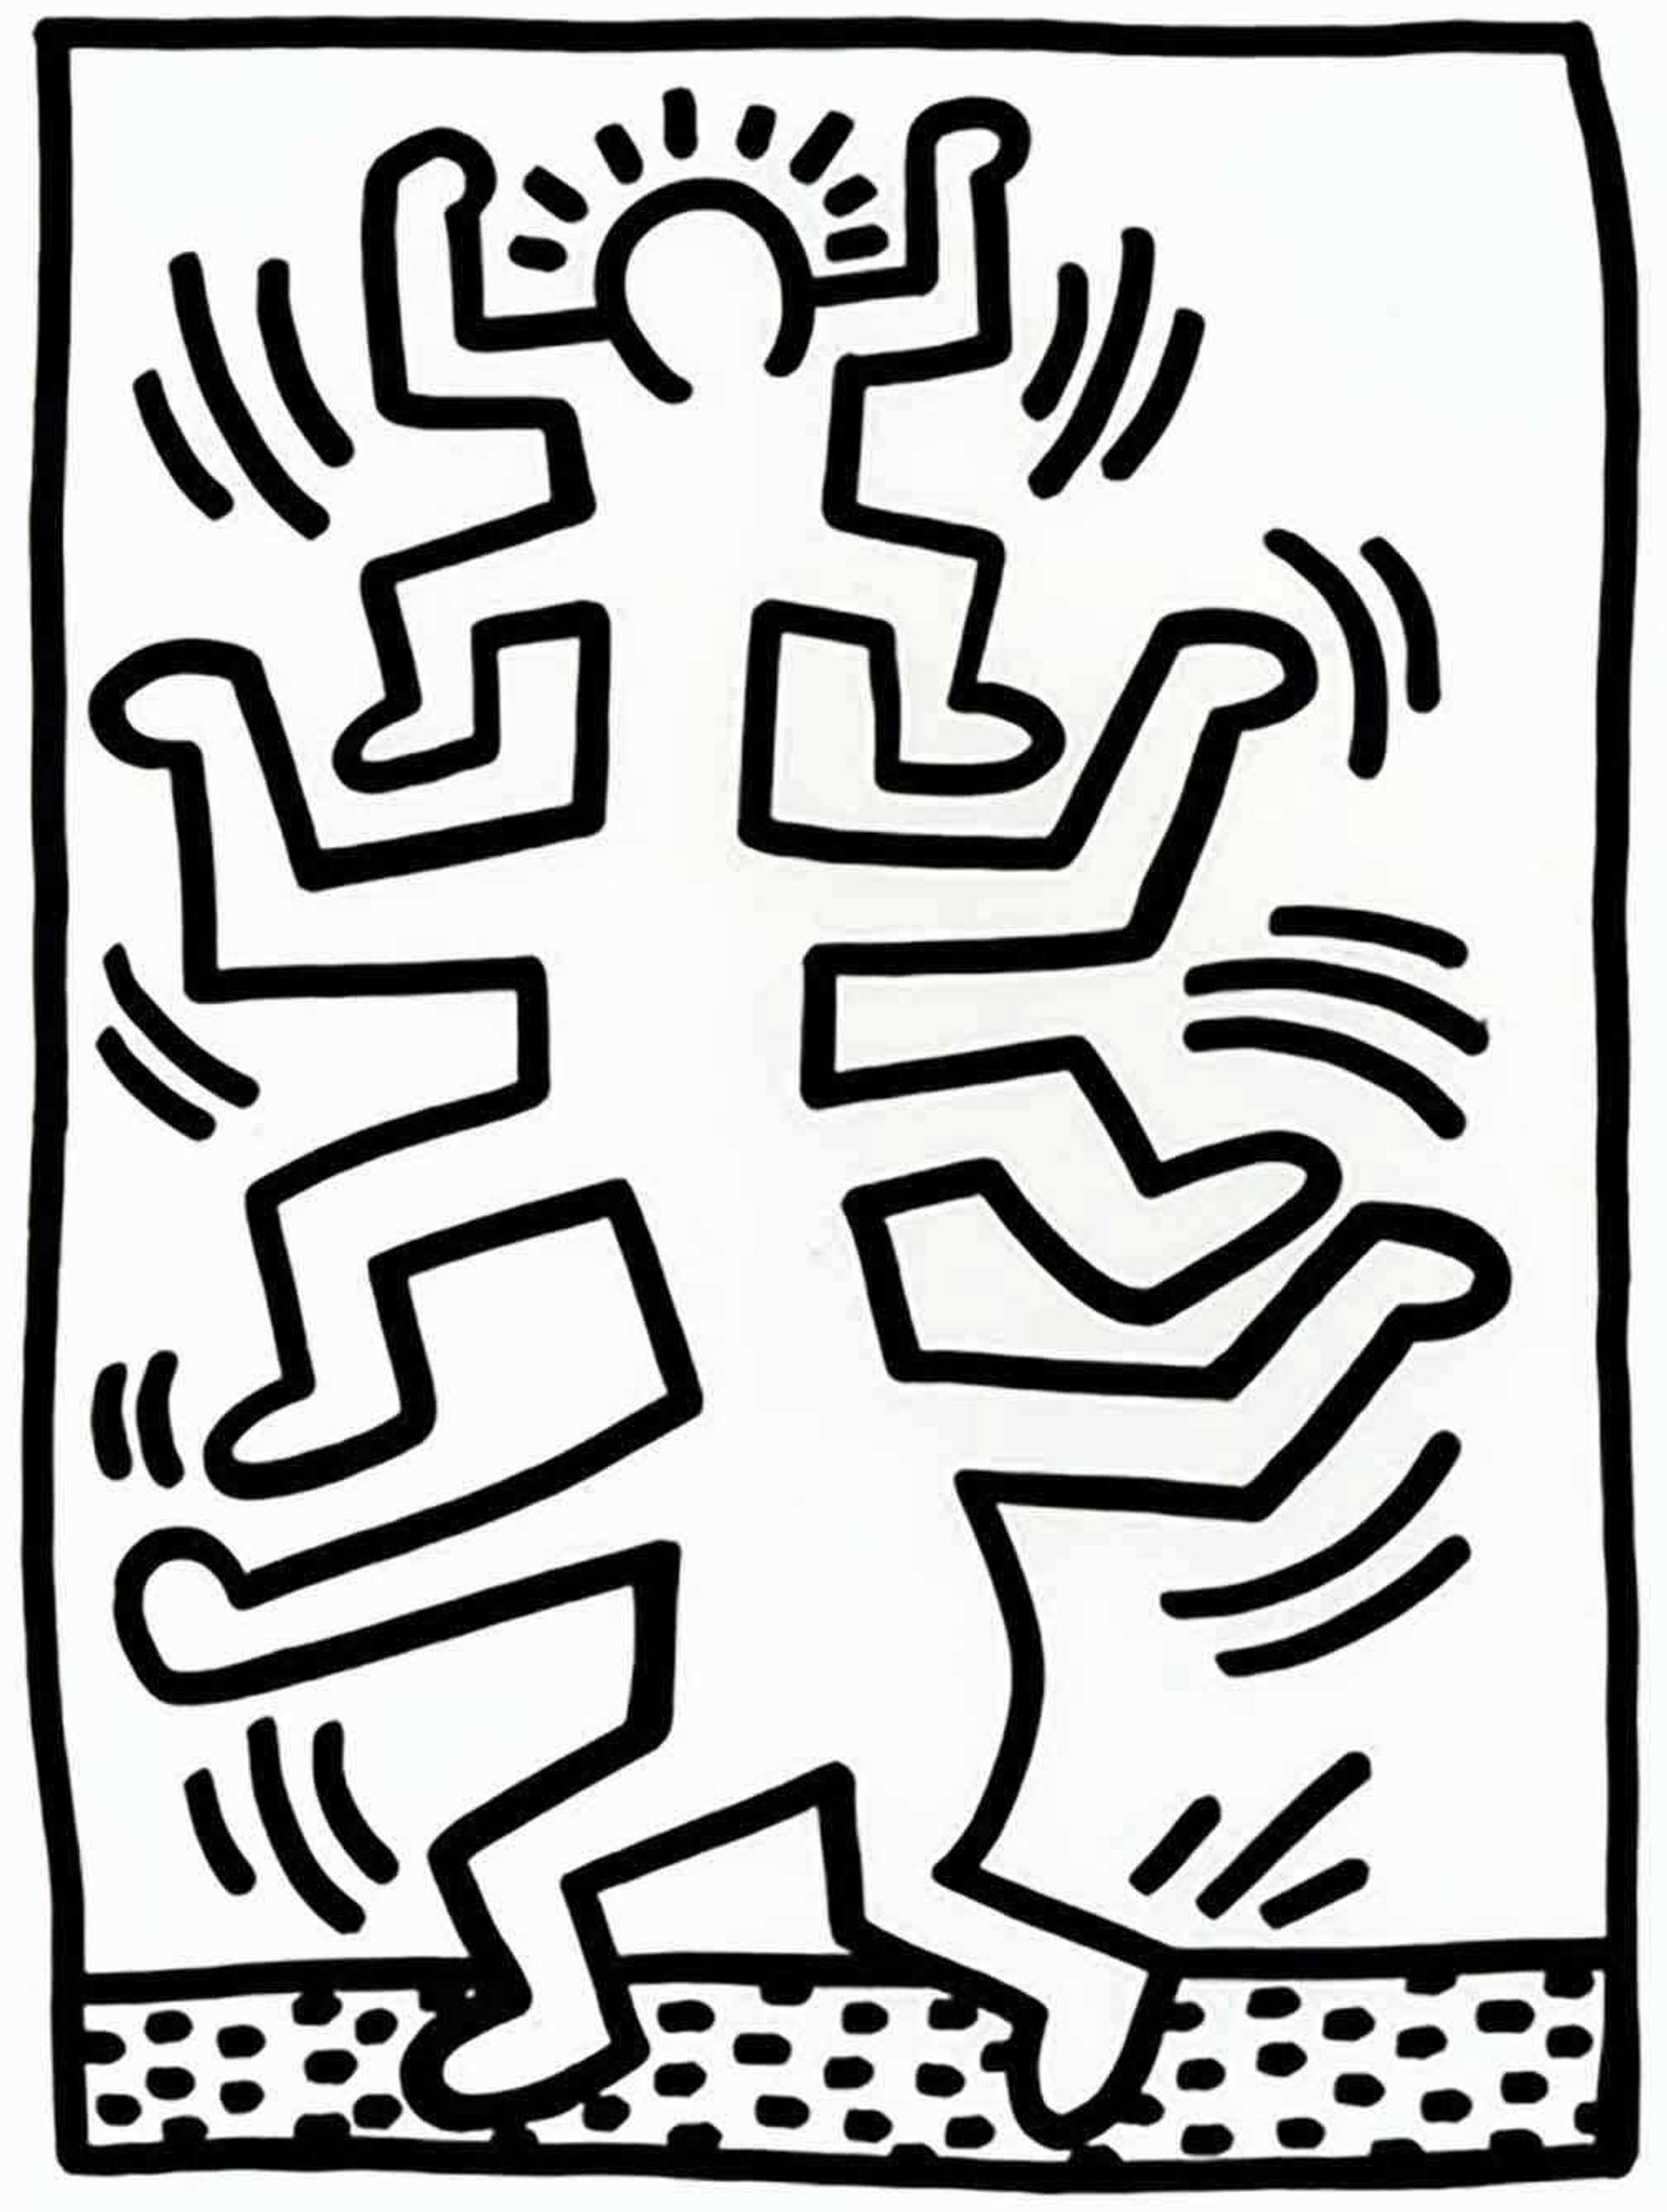 Growing 1 by Keith Haring